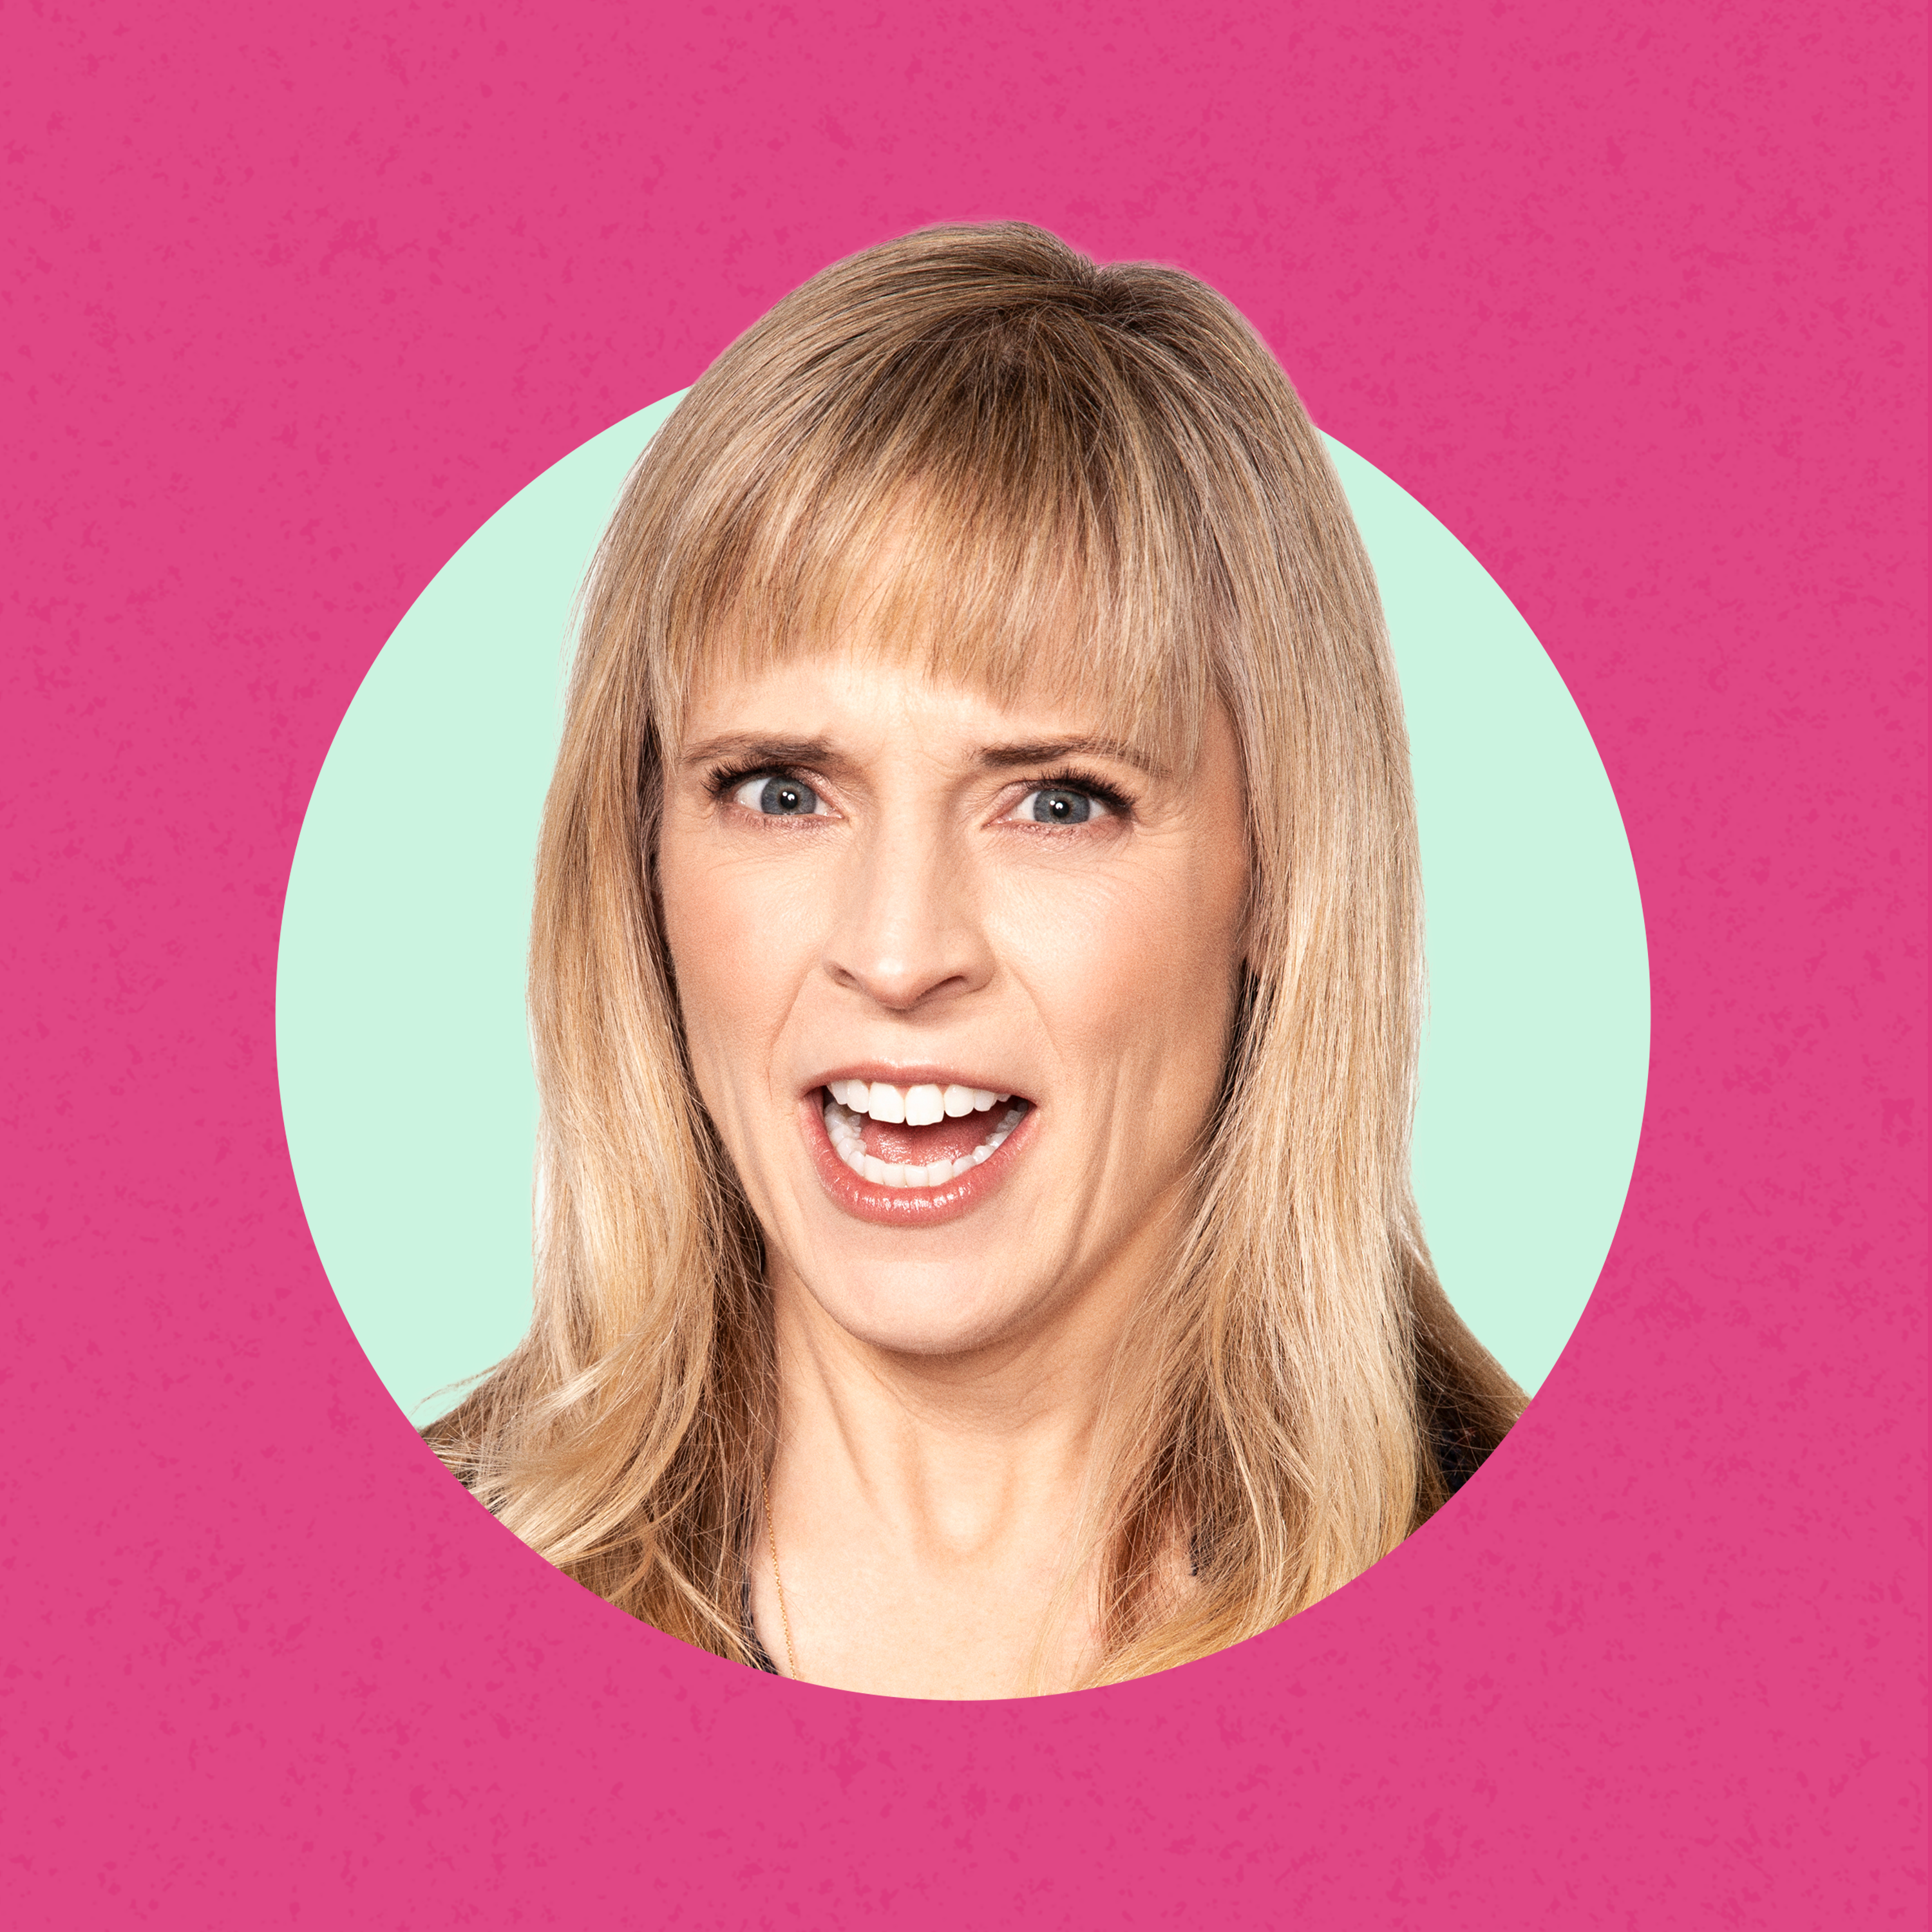 Comedy at 10am or 10pm? (with Maria Bamford)